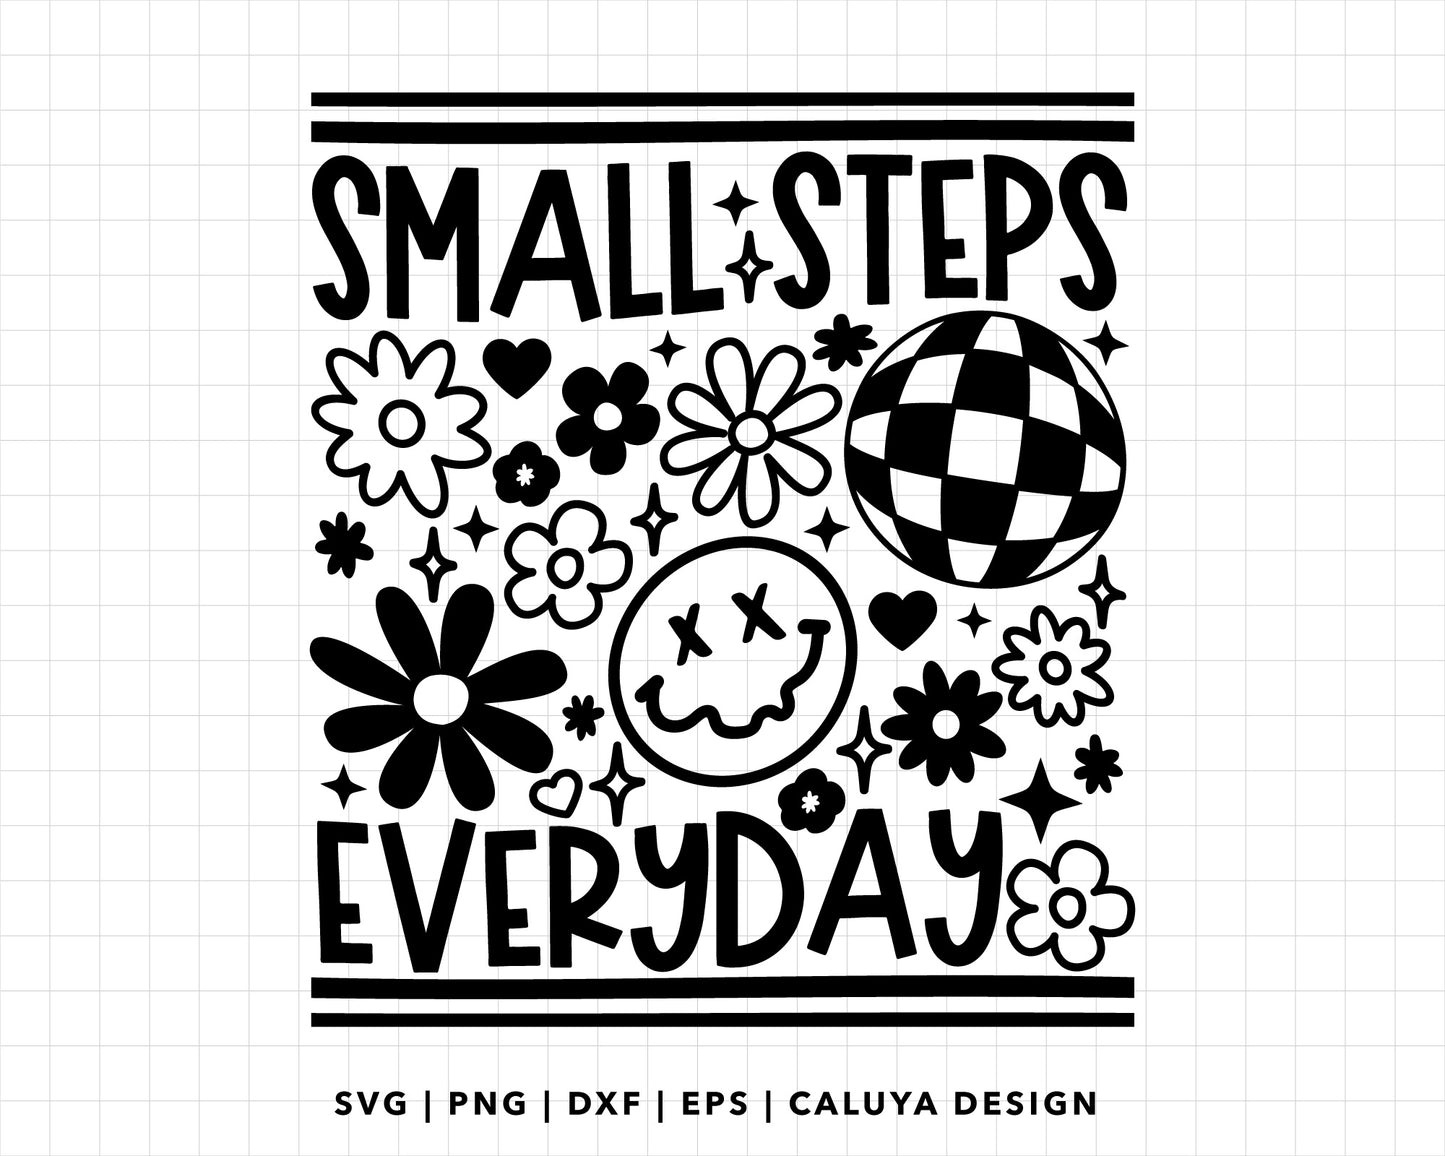 FREE Small Steps Everyday SVG | Retro Smiley Face SVG Cut File for Cricut, Cameo Silhouette | Free SVG Cut File